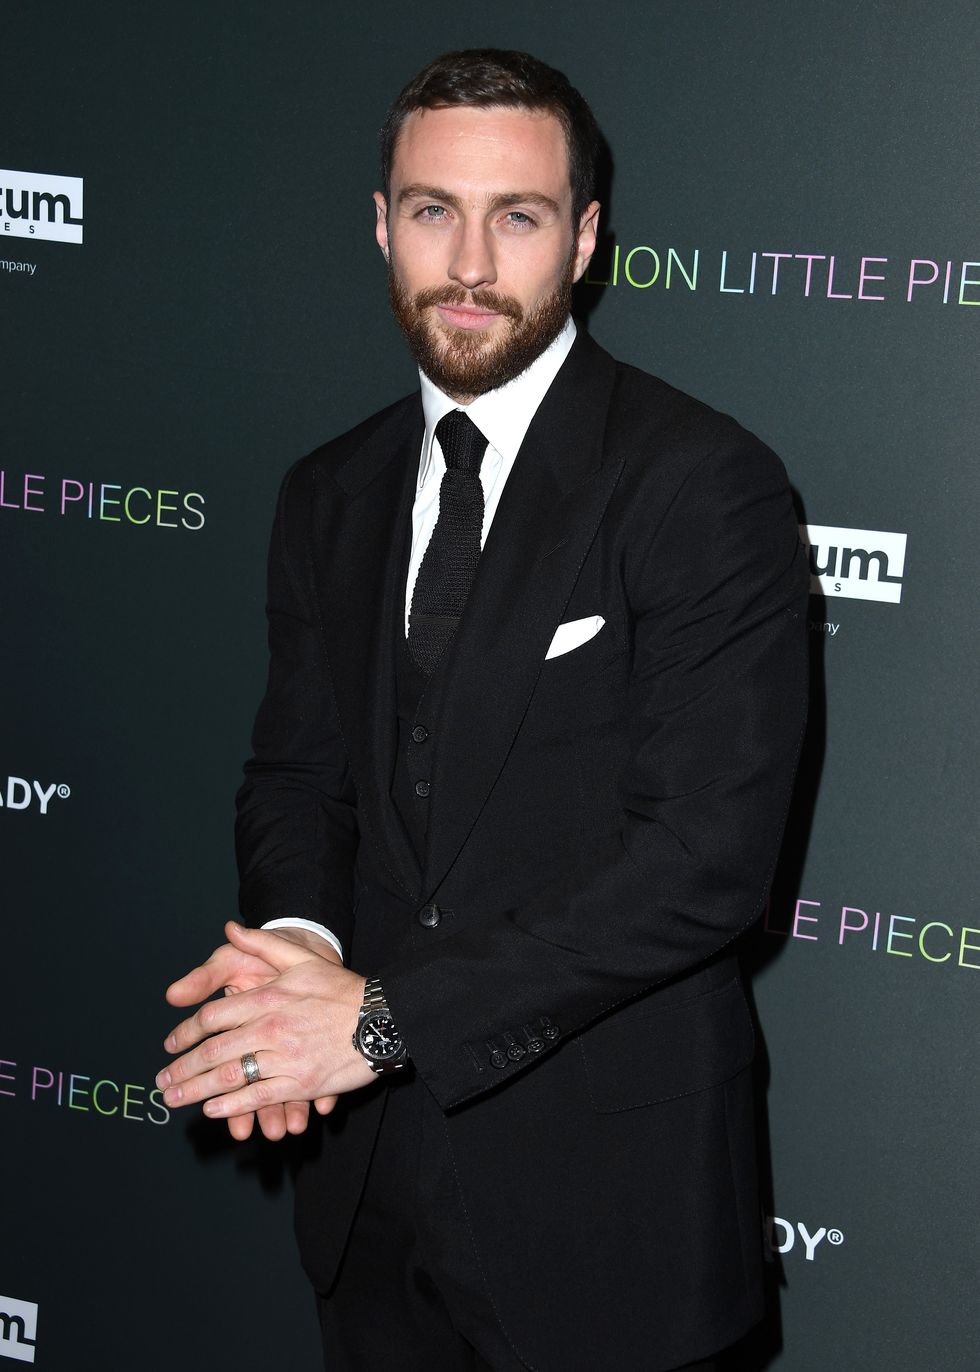 aaron taylor johnson at an event in december 2019